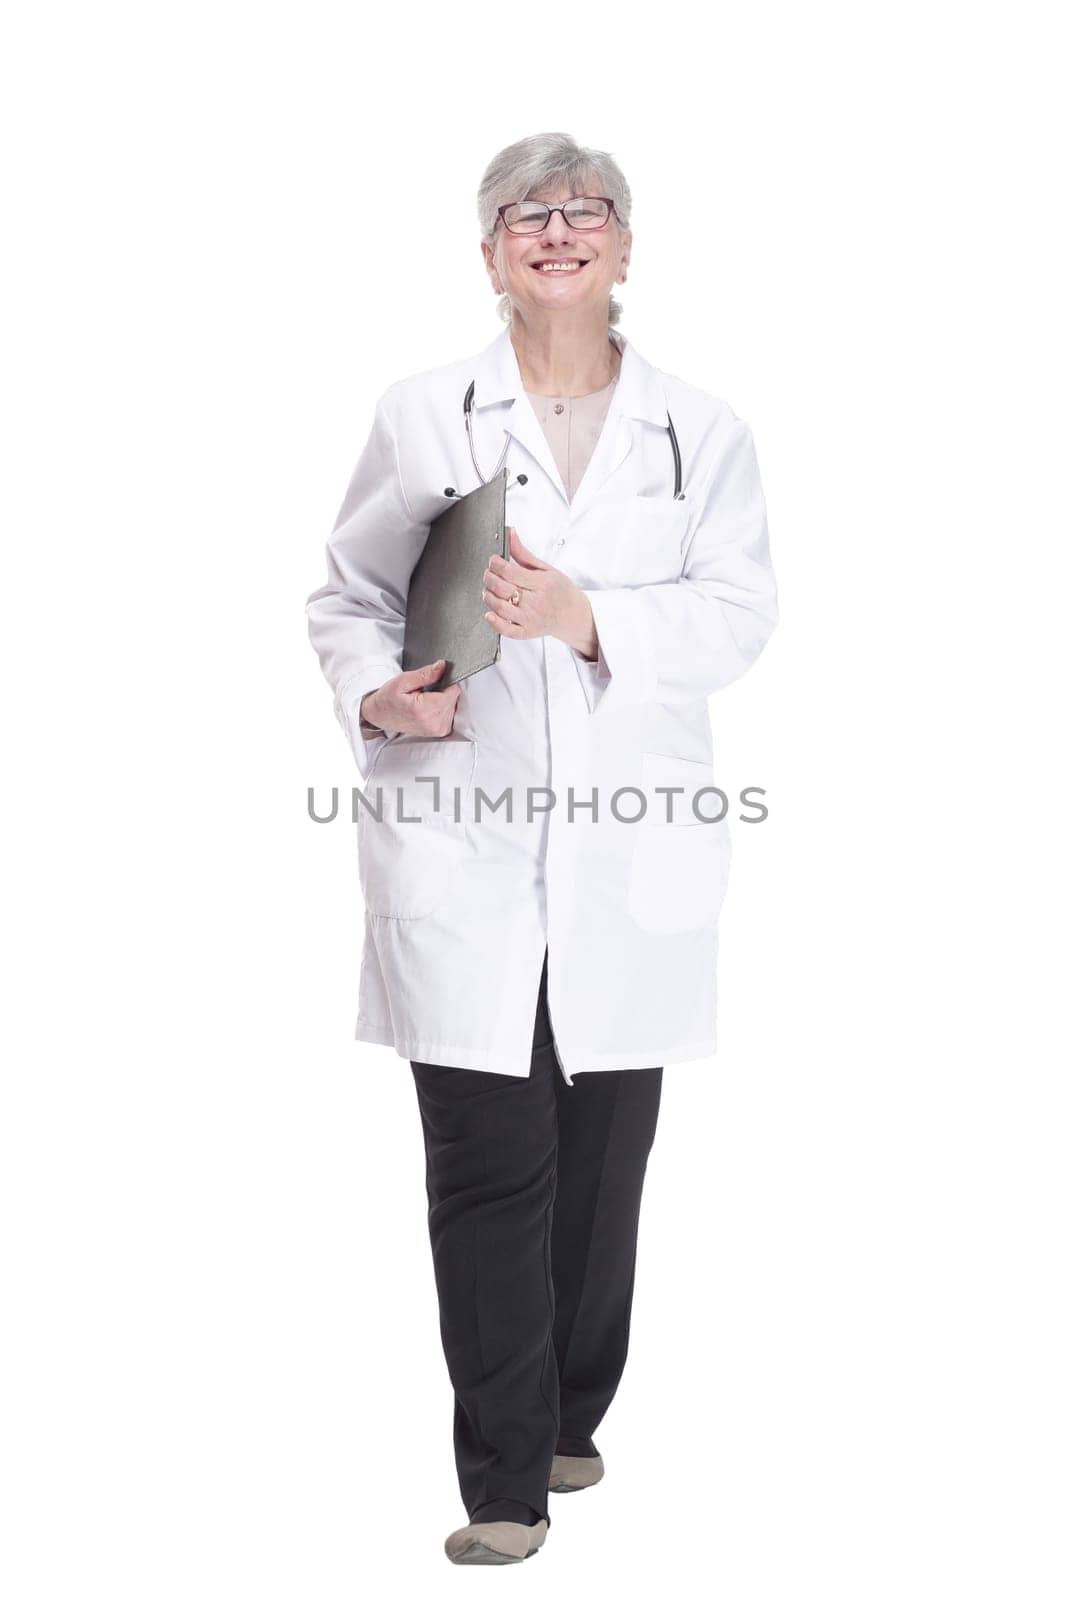 in full growth.confident female medic with clipboard looking at you. isolated on white background.